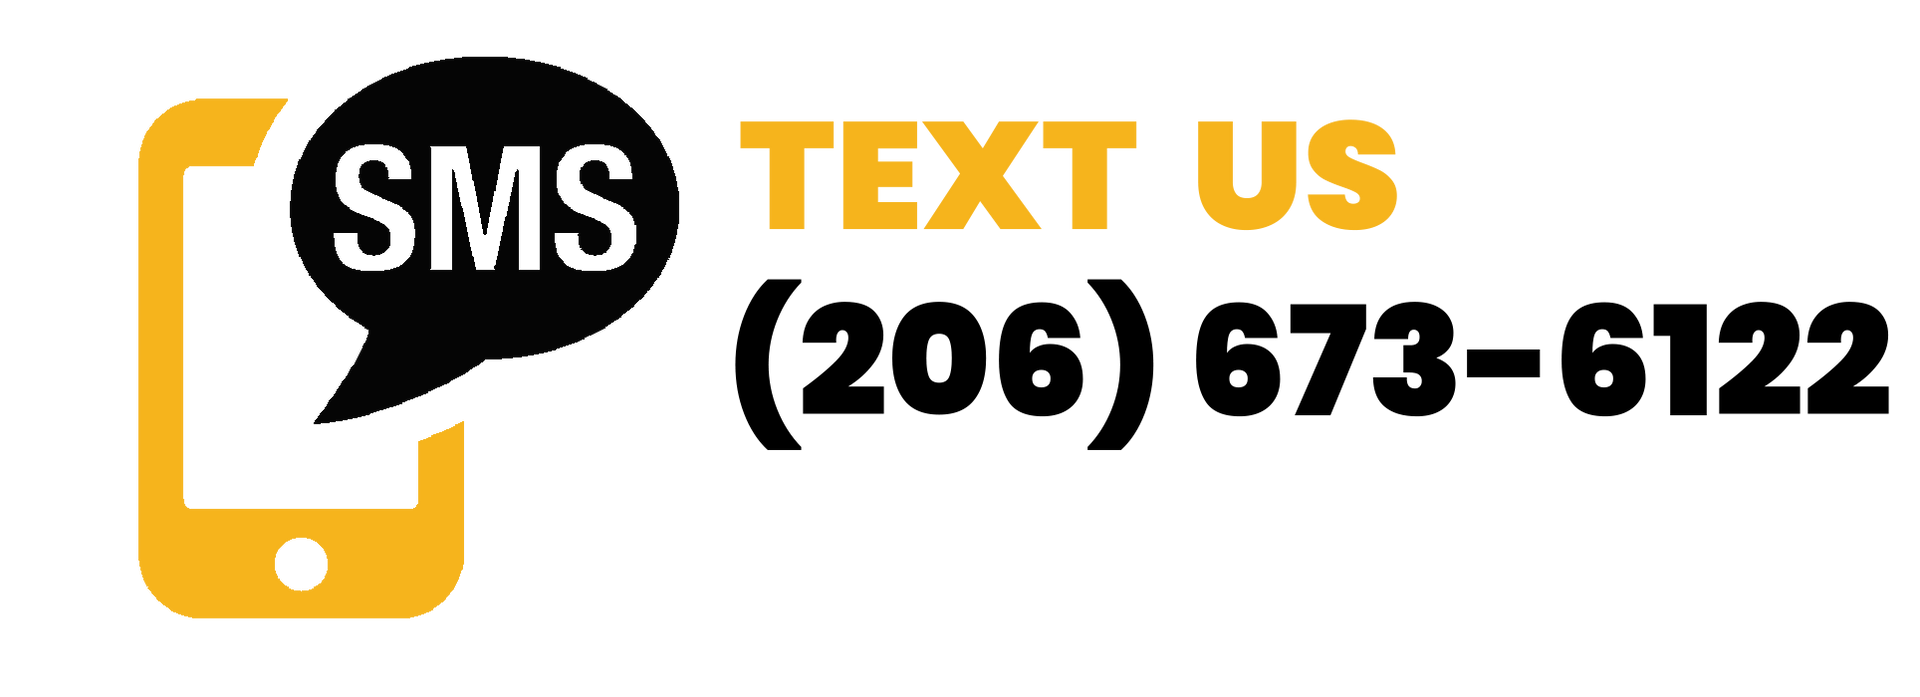 Click to Text